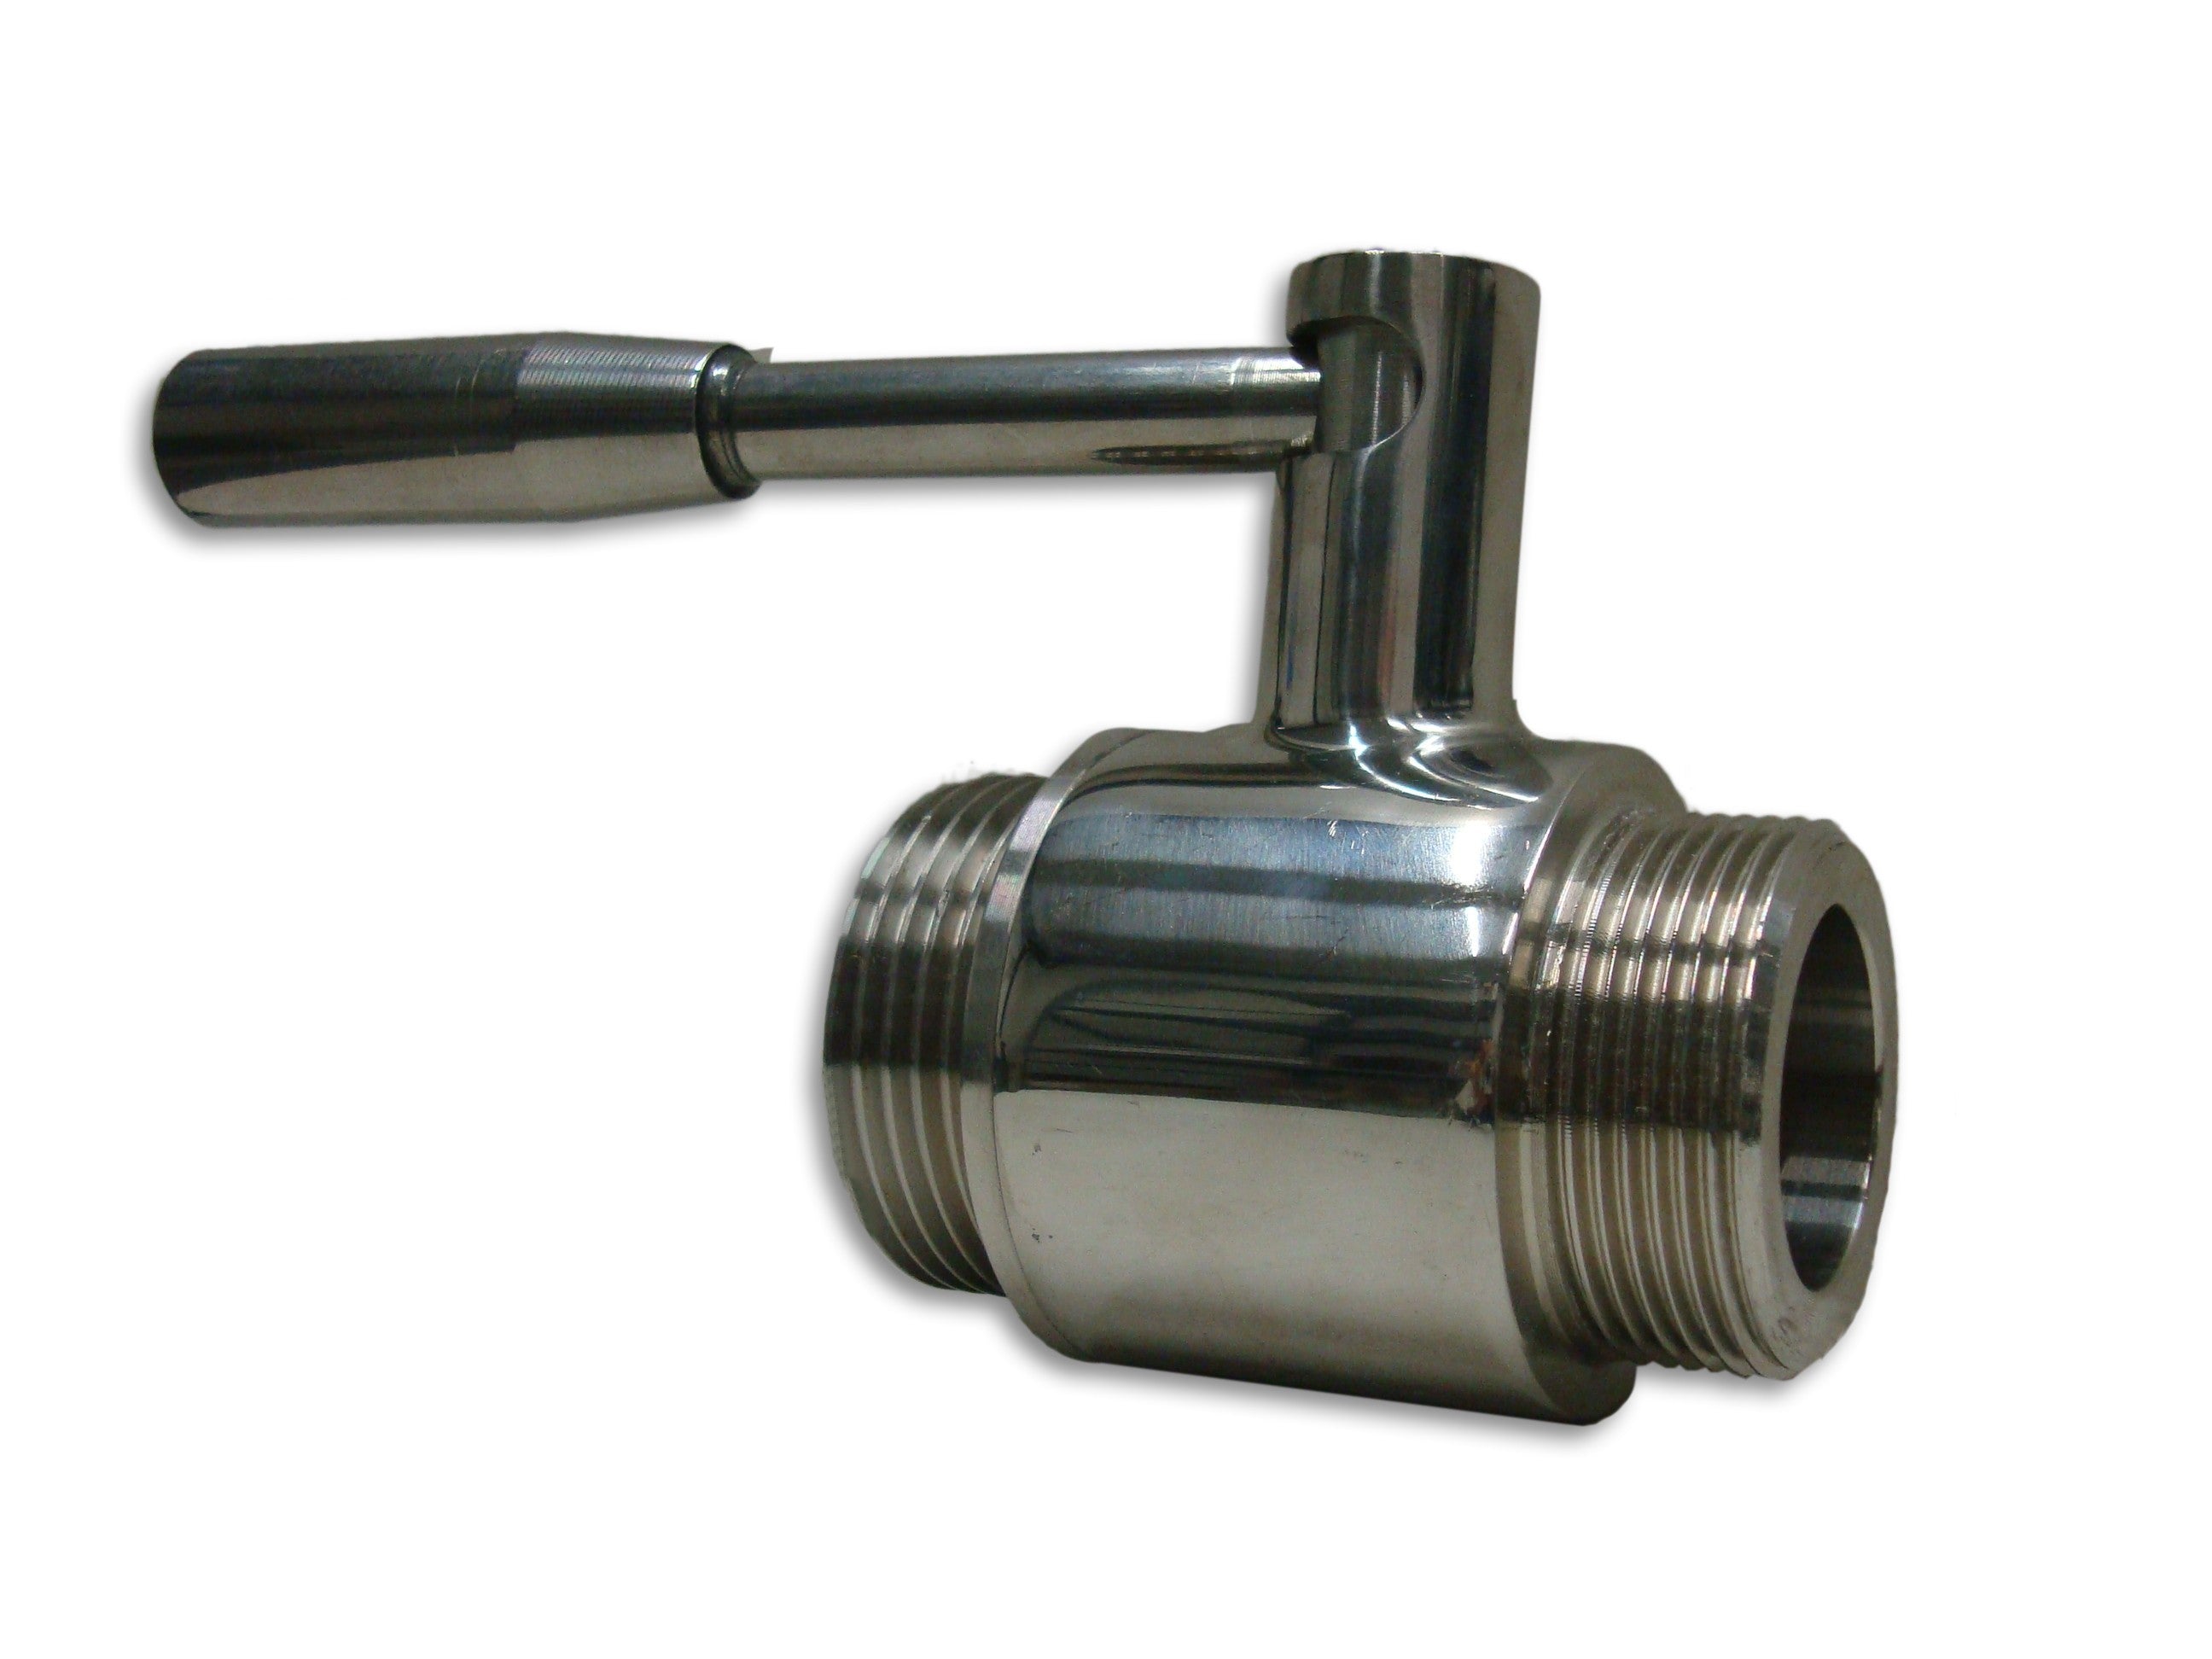 Stainless steel ball valve 3/4" with enological screw 25